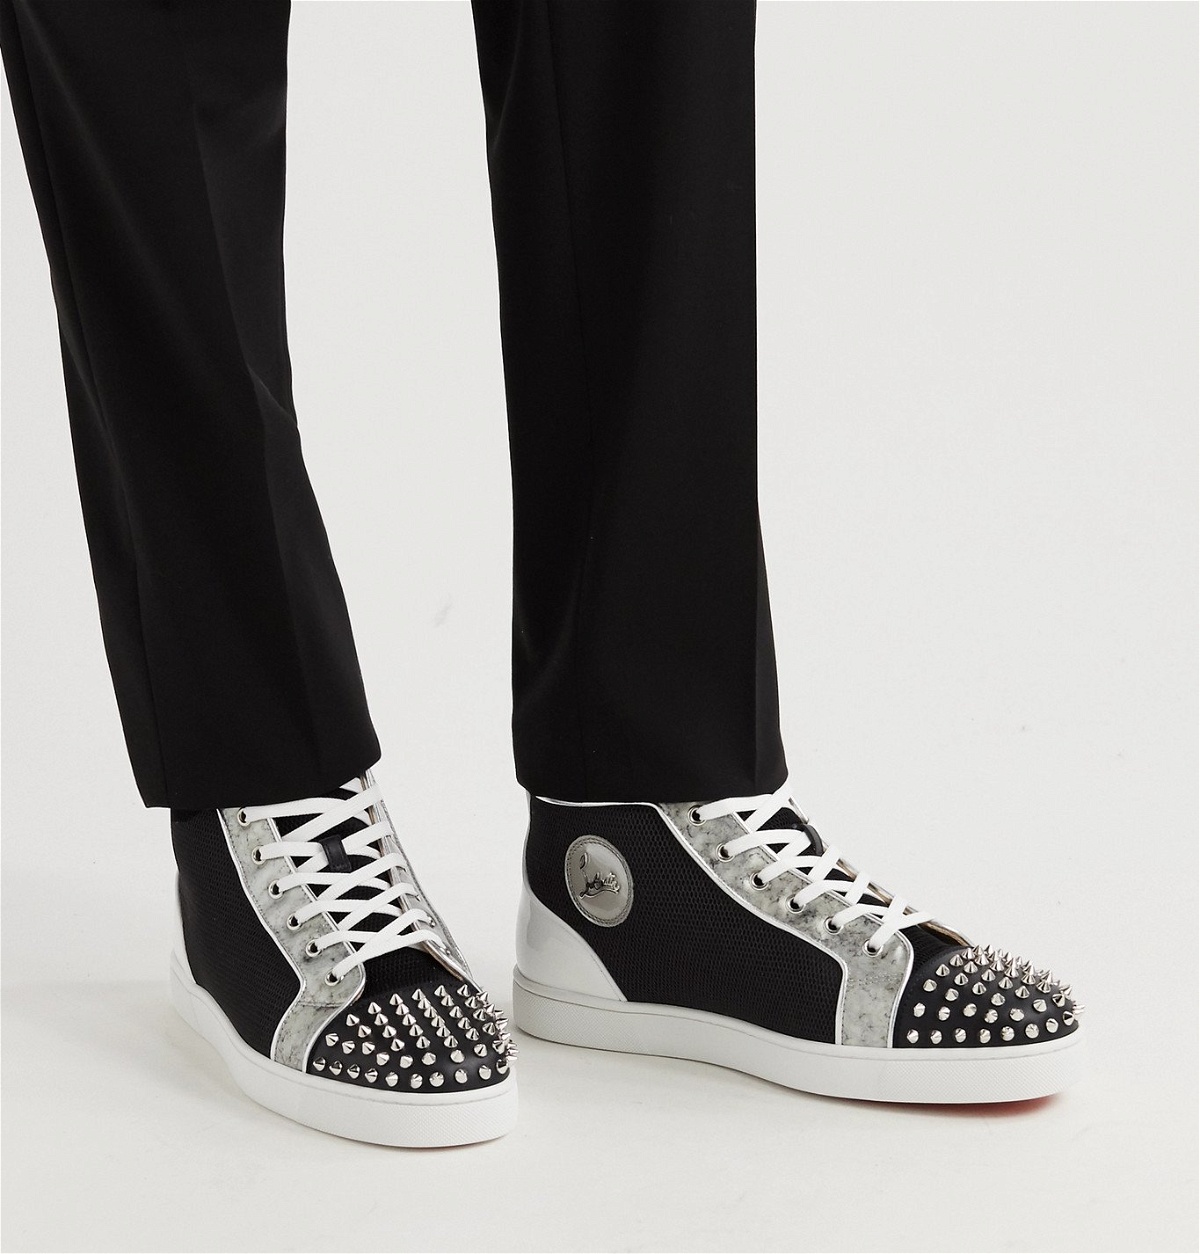 Christian Louboutin Black Leather Louis Spikes High Top Sneakers